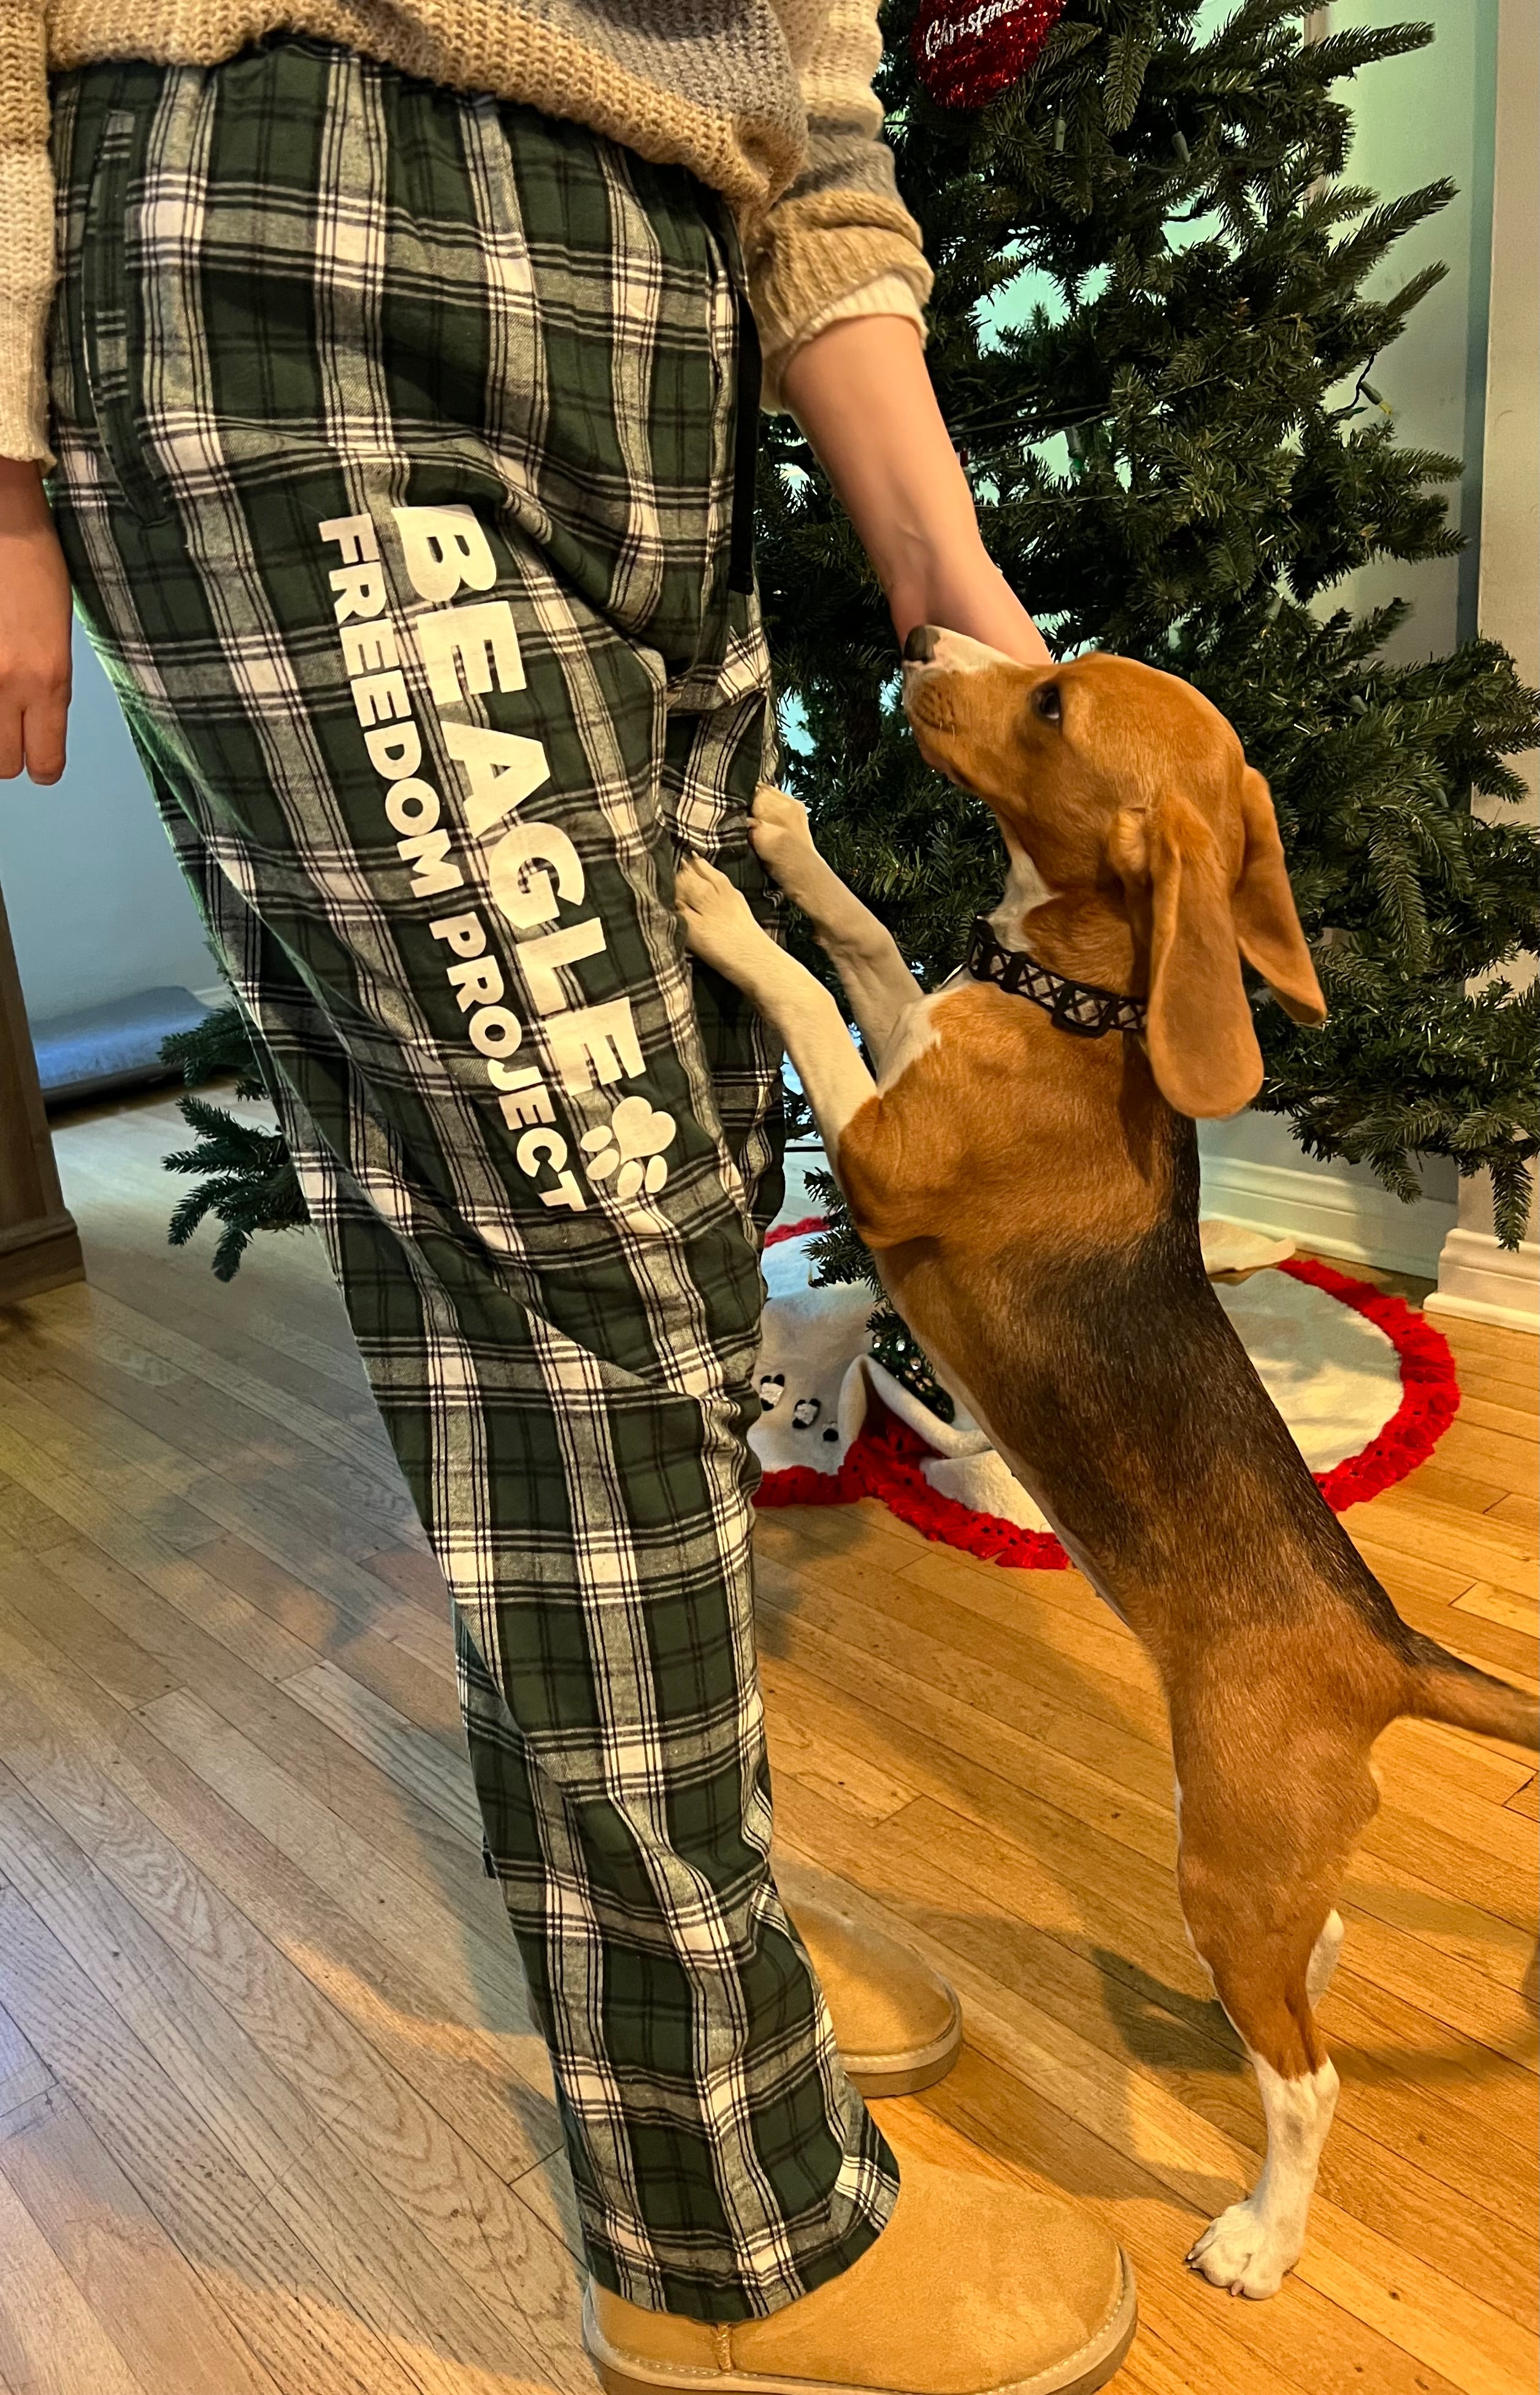 BFP Green Flannel Pajama Pants – Beagle Freedom Project™